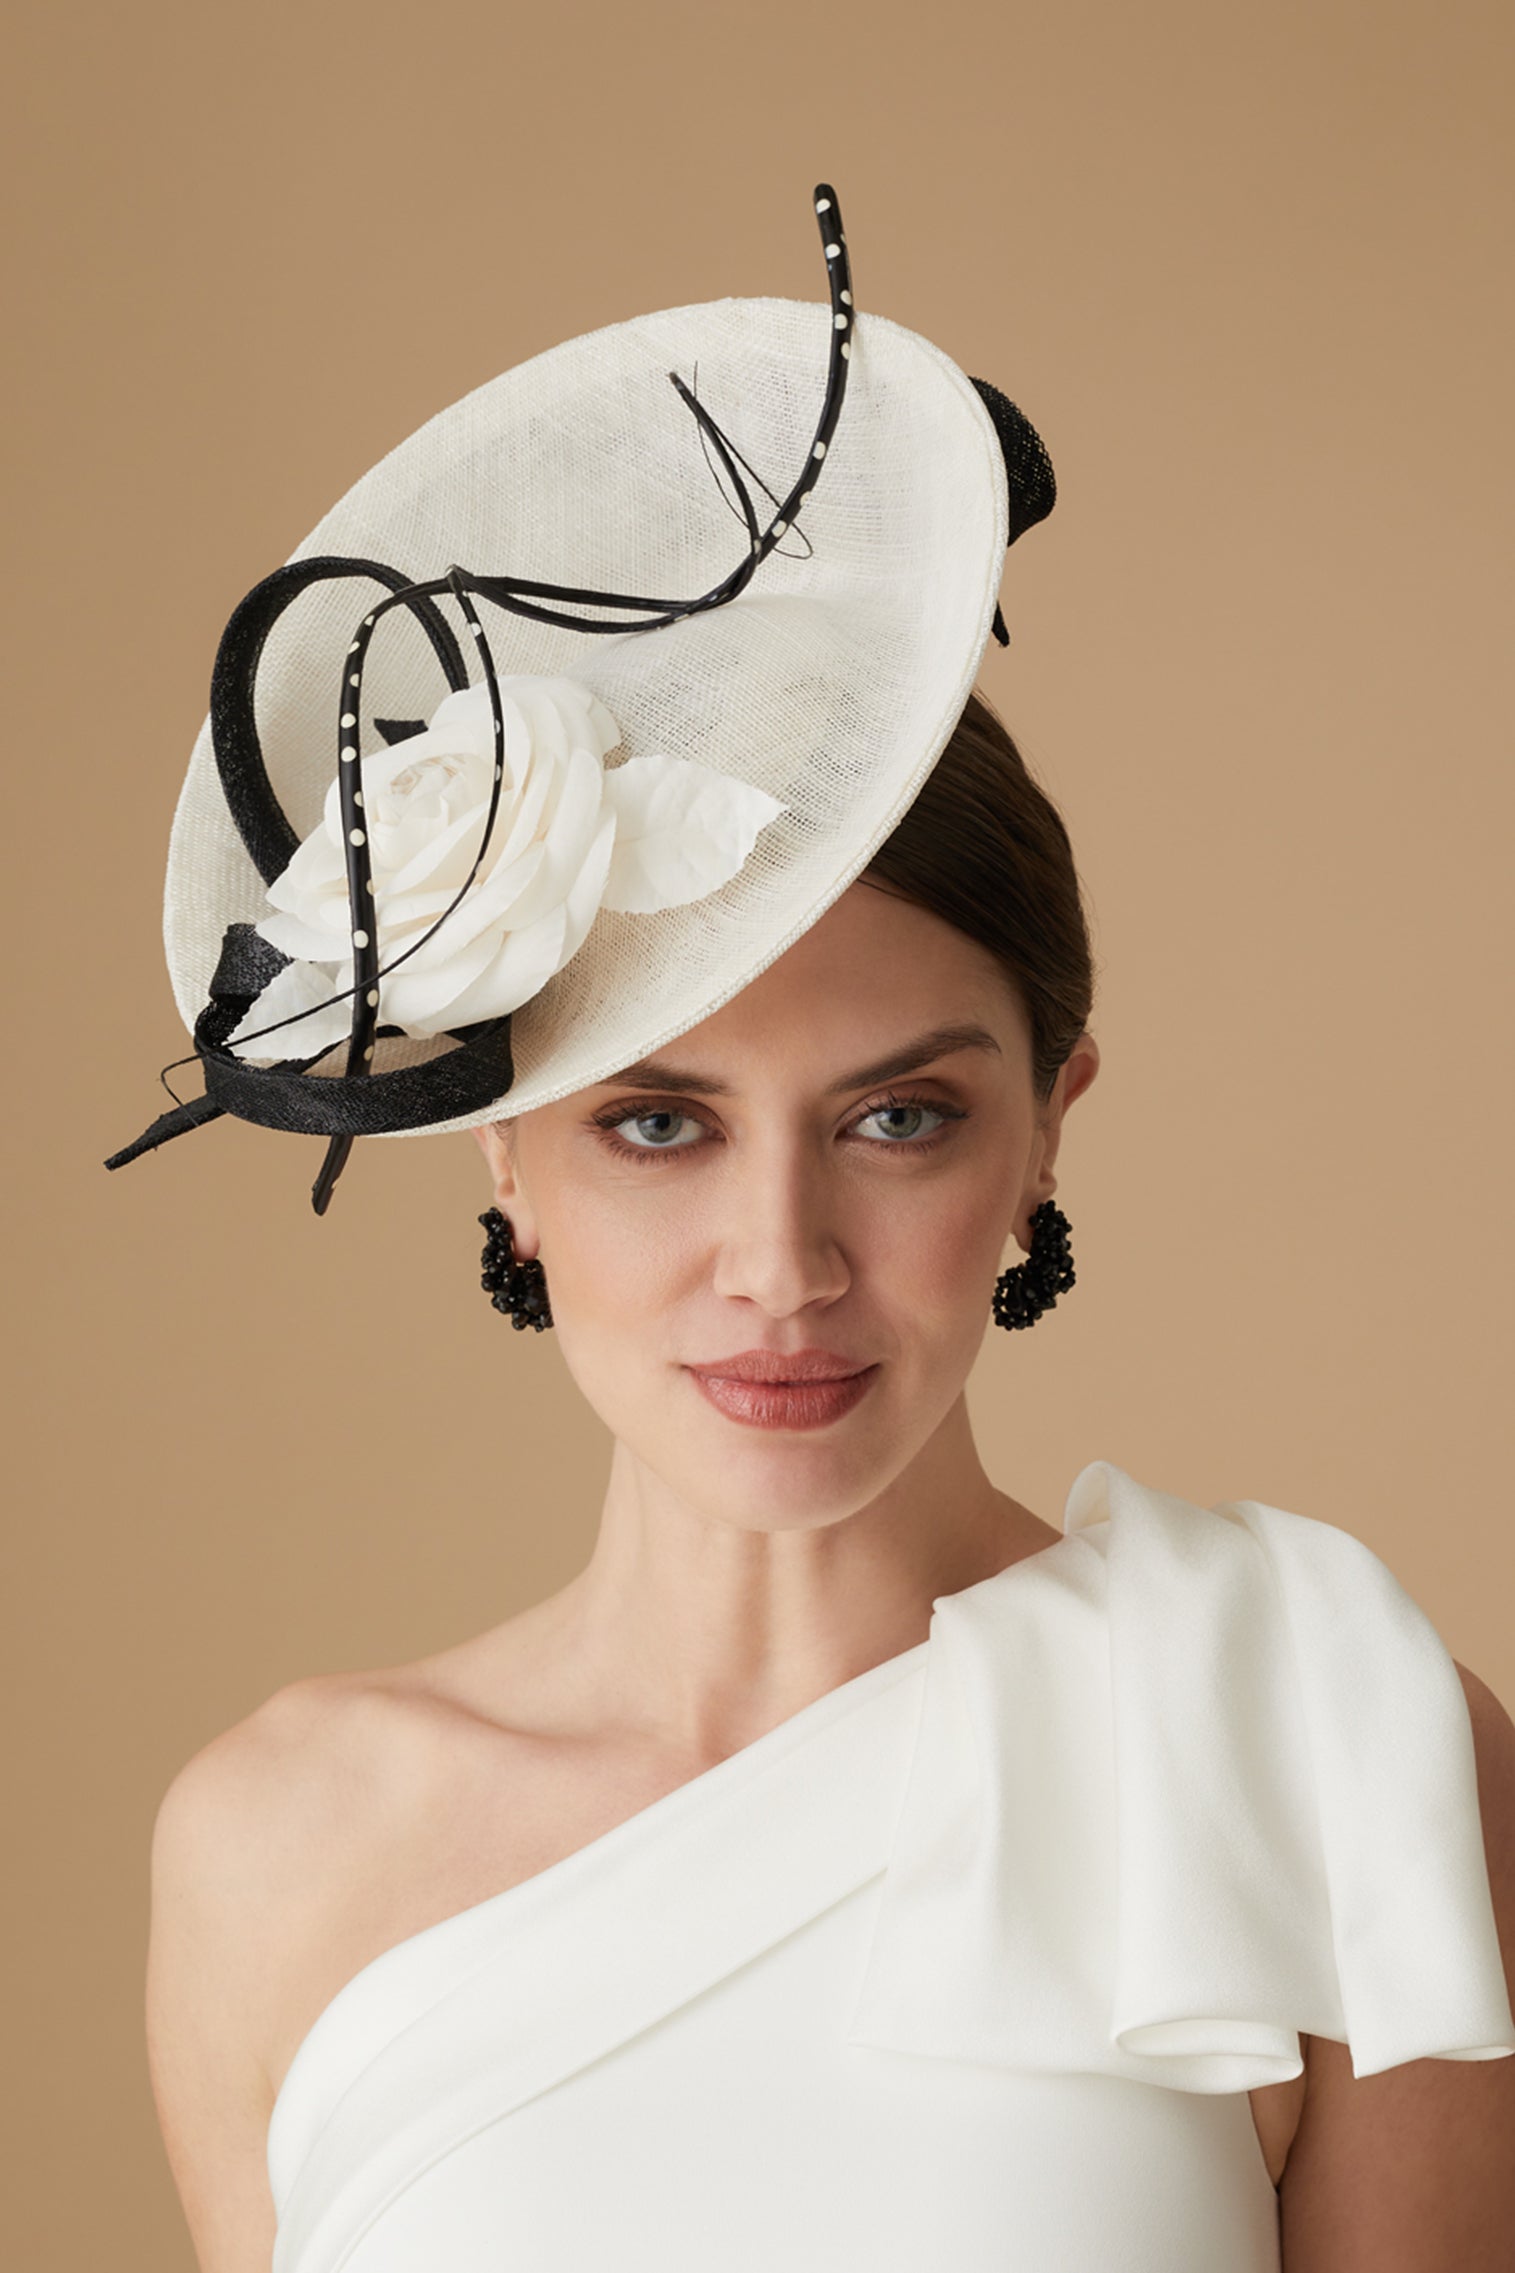 Assam White and Black Saucer Hat - Lock Couture by Awon Golding - Lock & Co. Hatters London UK